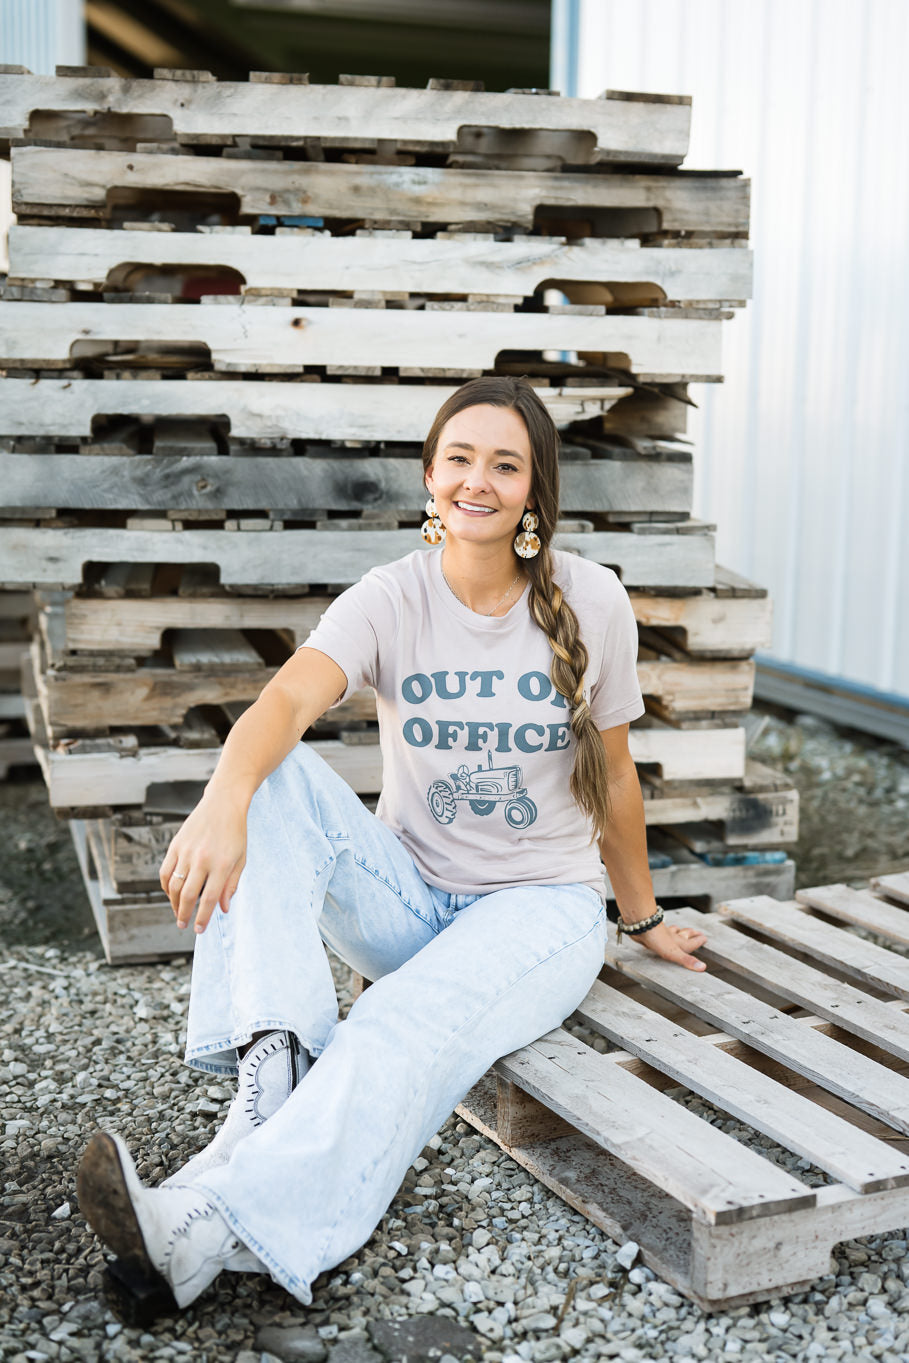 Out of Office in Dusty Mauve | Sizes S - 3X - Rosebud's Tees